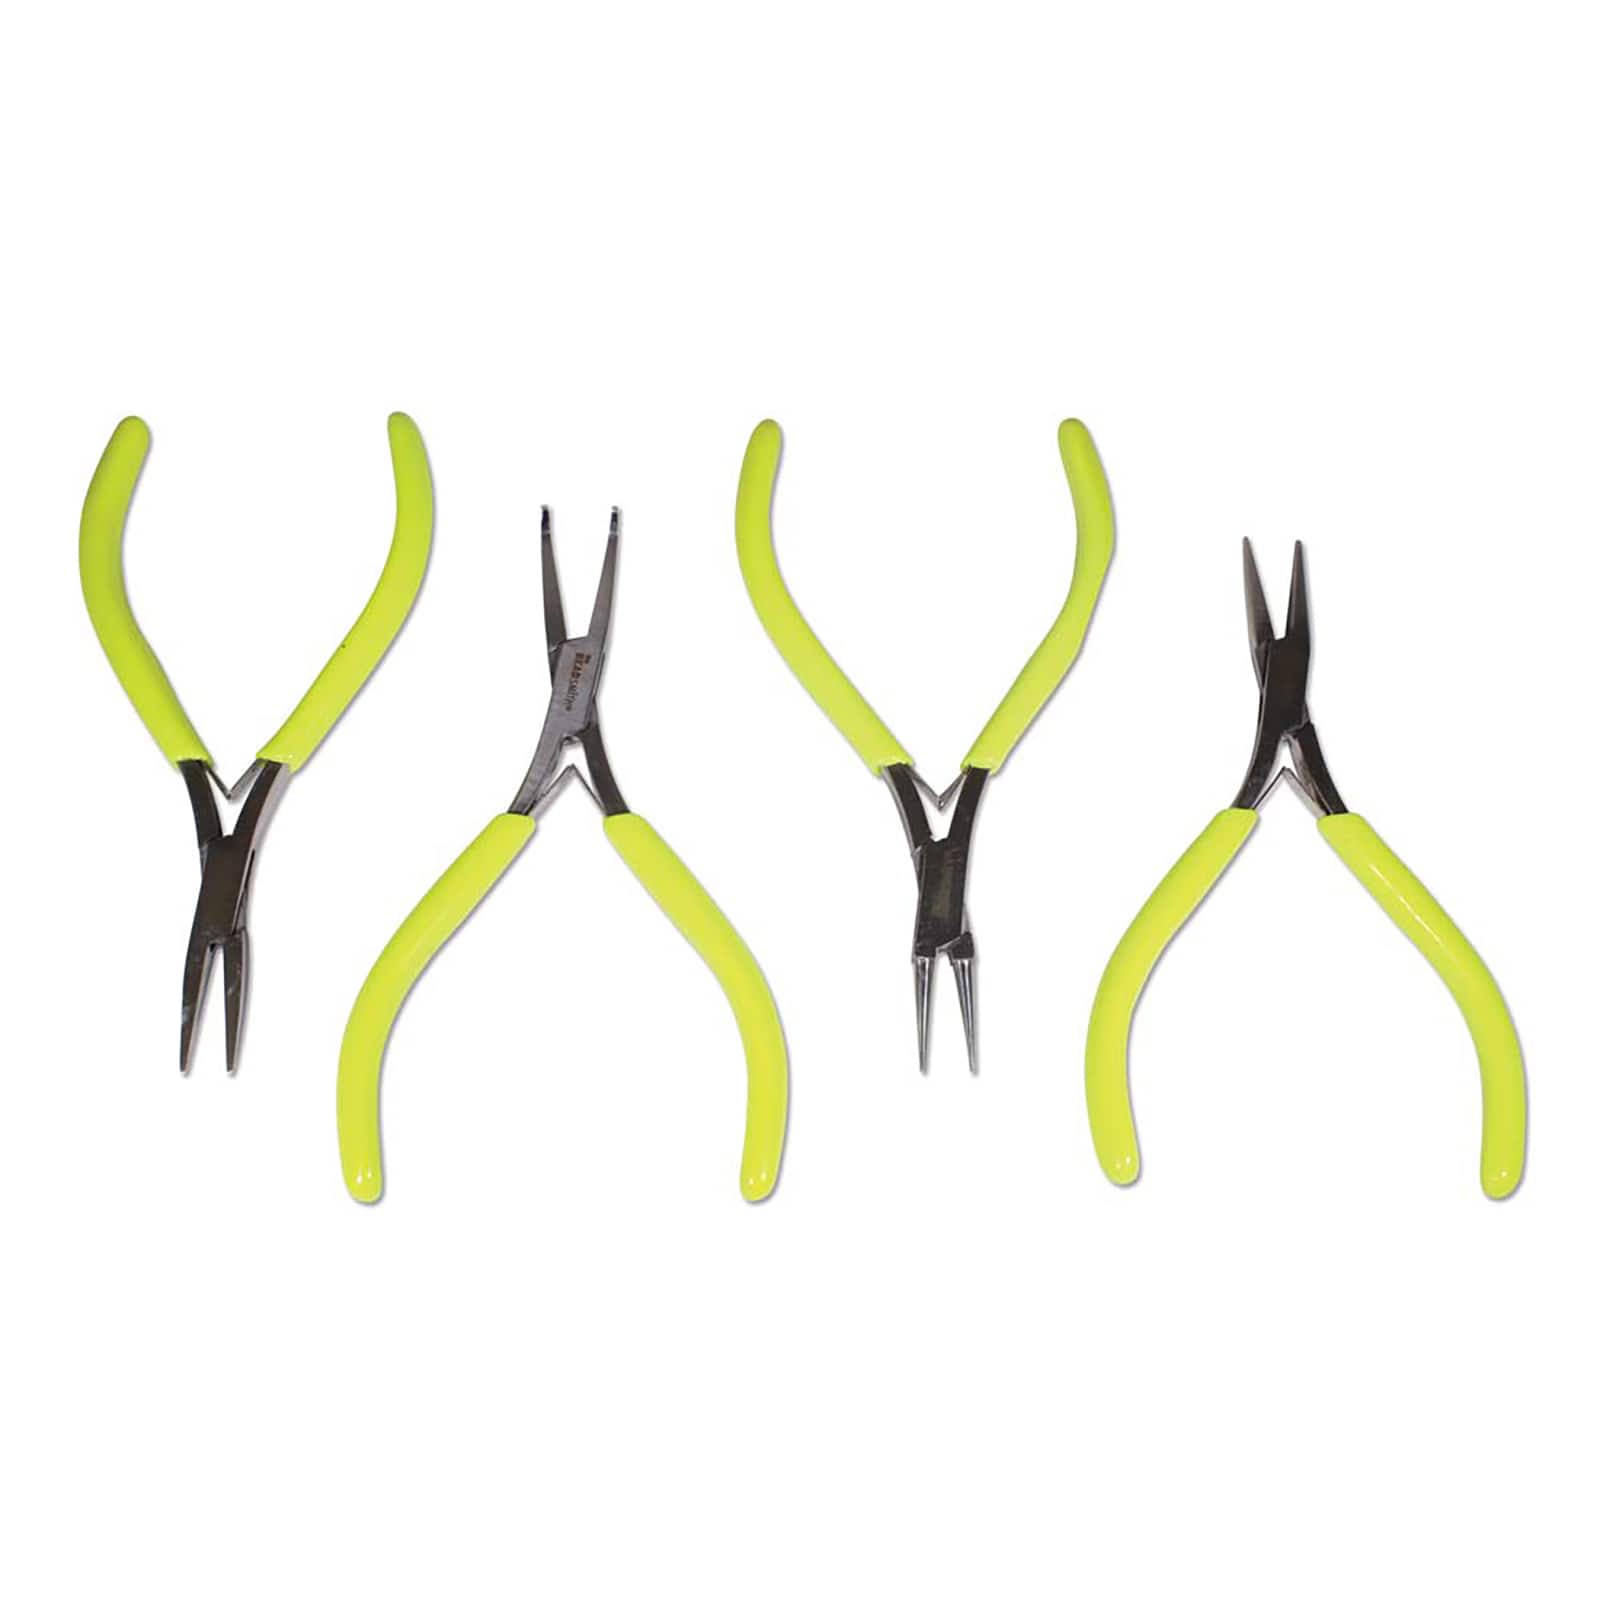 The Beadsmith® Micro-Fine™ Flat Nose Pliers